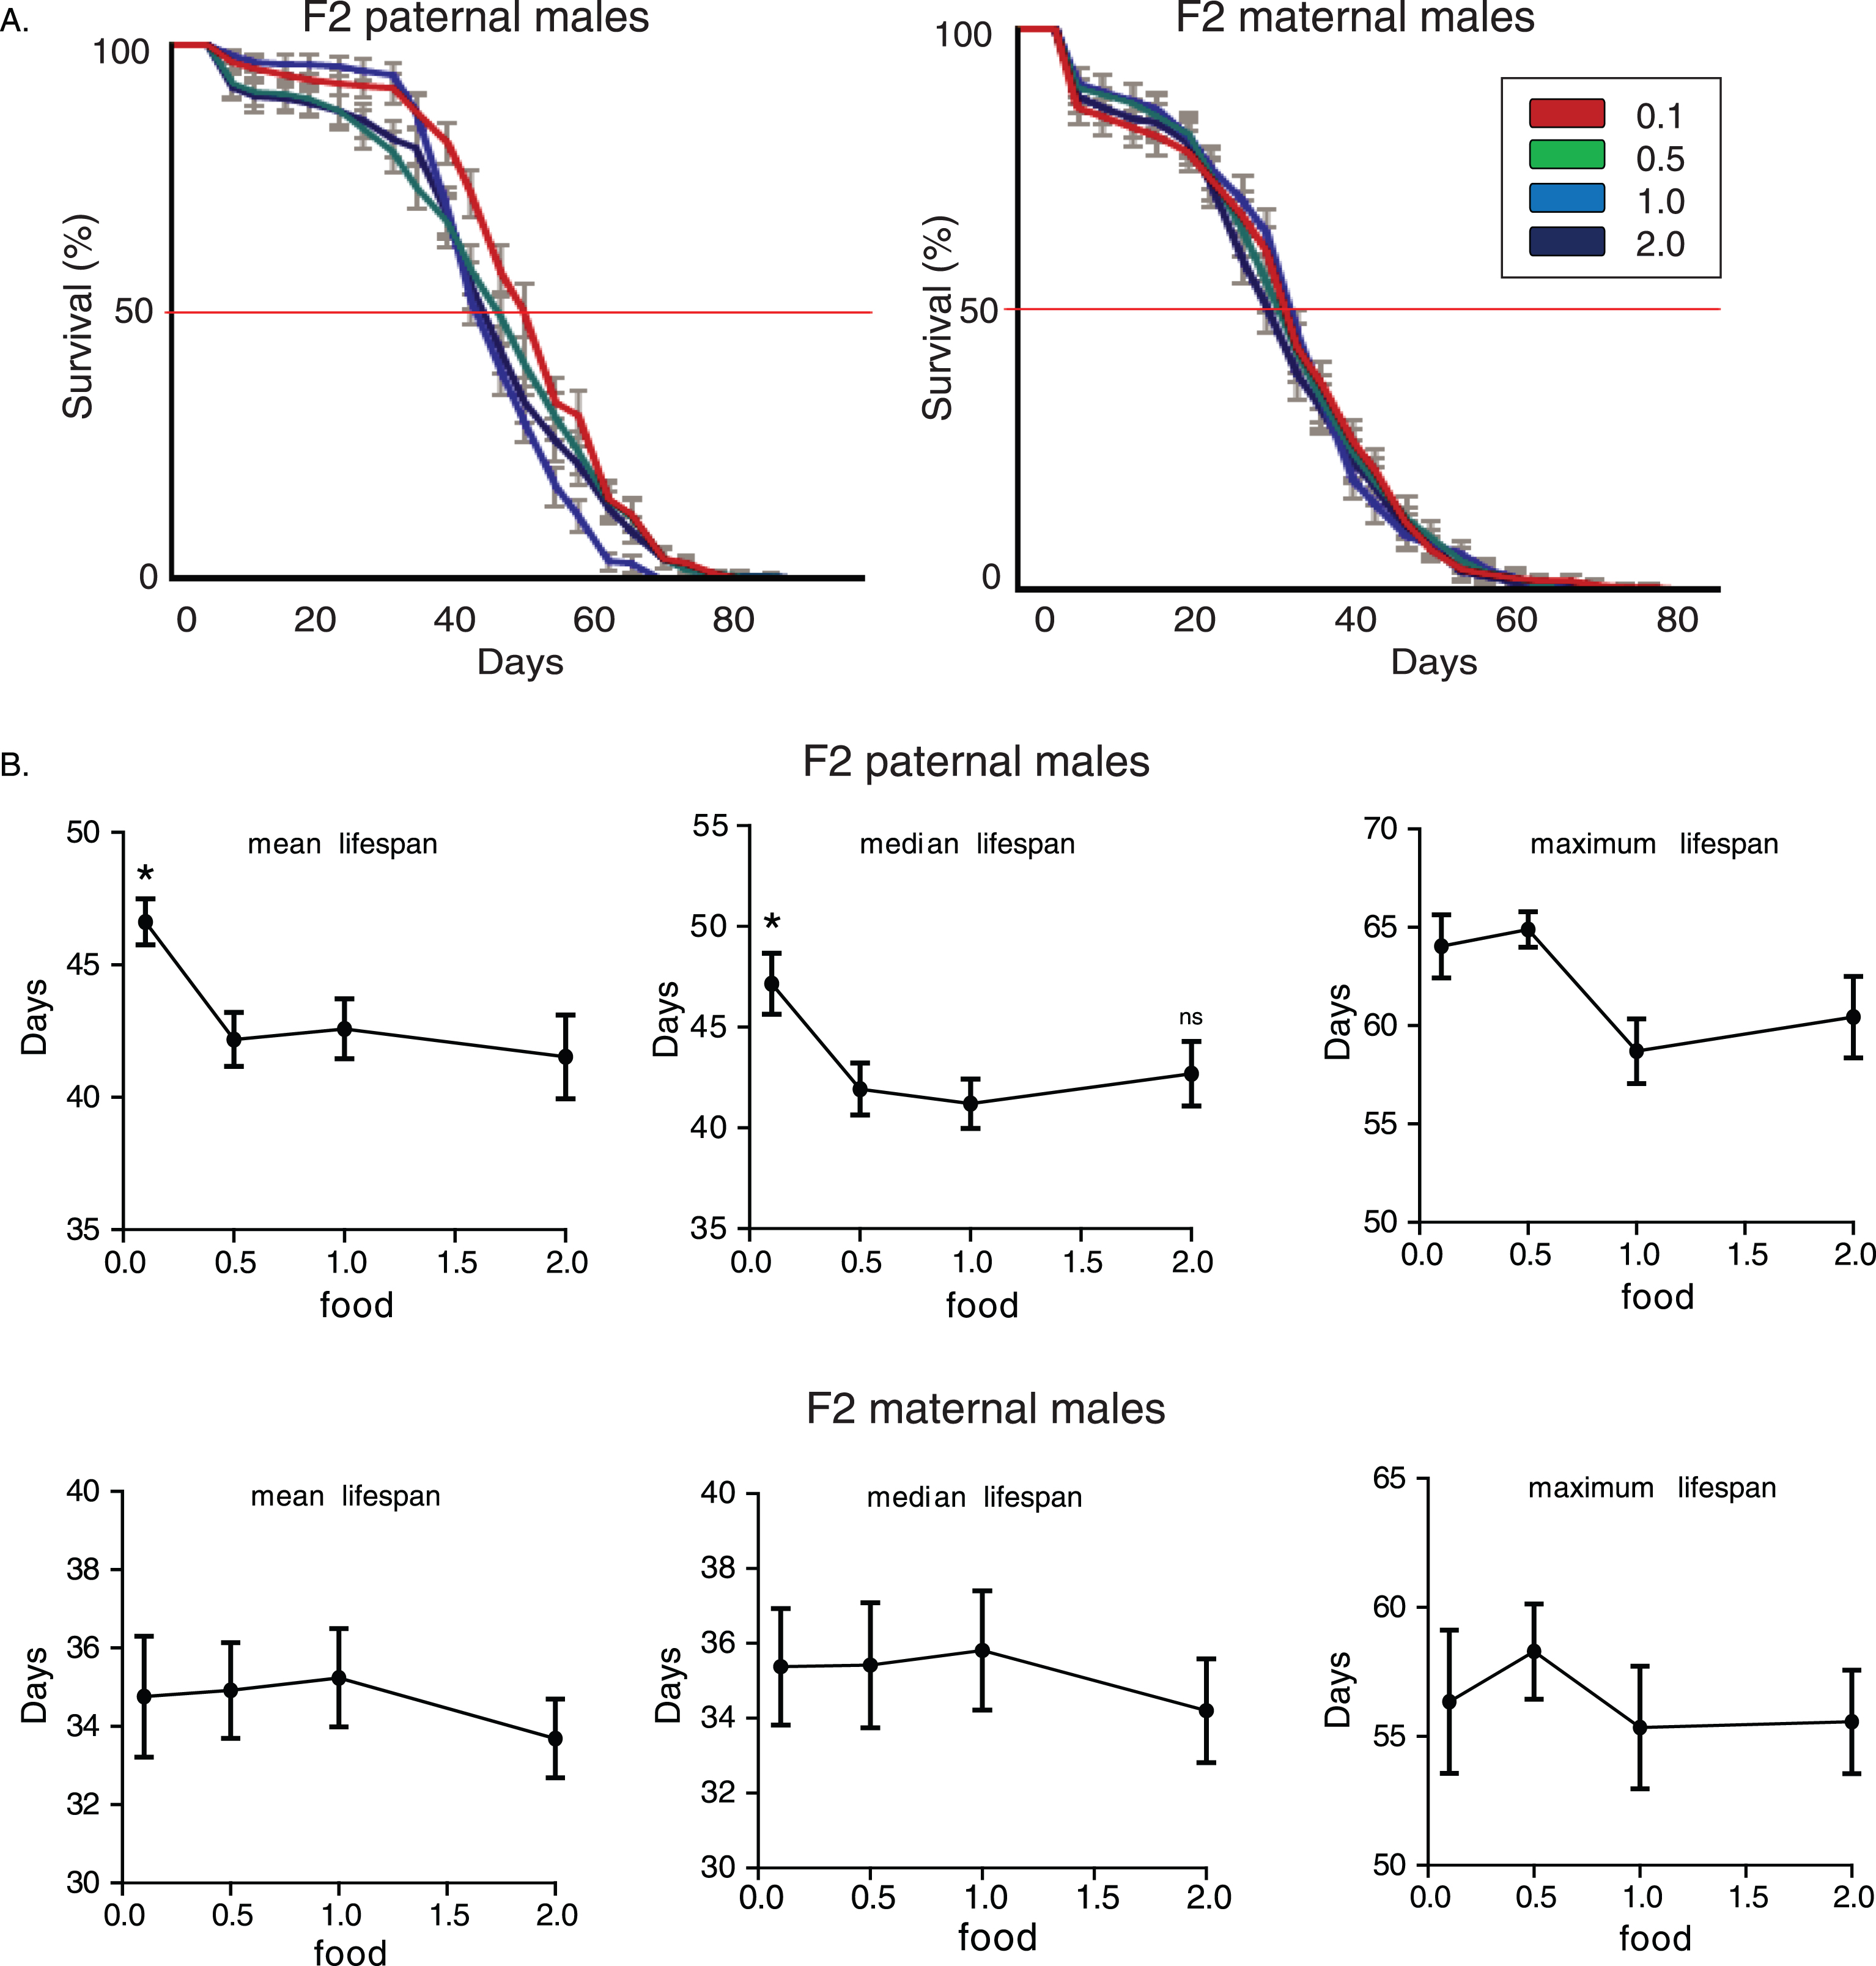 Nutritional regulation of transgenerational longevity in wDah strain is sex-specific. A) Lifespan curves of F2 males from paternal and maternal grandfathers subjected to different dietary regimes through larval stages. F2 virgin males whose paternal grandfathers had experienced starvation through larval stages (F2 paternal 0.1 males) were long-lived compared to the other groups. F2 (paternal) 0.1 vs. 0.5: p < 0.042, F2 (paternal) 0.1 vs. 1.0: p < 4×10–6 and F2 (paternal) 0.1 vs. 2.0: p < 0.0025, log rank test. Lifespan curves did not differ significantly in F2 virgin males whose maternal grandfathers were reared under different food conditions (F2 maternal males) (p > 0.05, log rank test). Lifespan data shown are from a single trial. For each lifespan experiment n > 260. Error bars indicate SEM. B) Mean, median and maximum lifespan of F2 males from paternal and maternal grandfathers exposed to different dietary conditions. Mean and median, but not maximum, lifespans were significantly increased in F2 parental males. F2 (paternal) 0.1 vs. 0.5: p < 0.05, q = 2.54, p < 0.05, q = 2.49 and p > 0.05, q = 0.356, F2 (paternal) 0.1 vs. 1.0: p < 0.05, q = 2.54, p < 0.05, q = 2.89 and p > 0.05, q = 1.696, F2 (paternal) 0.1 vs. 2.0: p < 0.05, q = 3, p > 0.05, q = 2.203 and p > 0.05, q = 1.548, for mean, median and maximum lifespan respectively. However, ancestor’s diet during larval stages did not significantly affect lifespan of F2 maternal males. One-way ANOVA with Dunnett’s multiple comparison against F2 0.1 flies. For each lifespan experiment n > 13, *p < 0.05. Error bars indicate SEM.